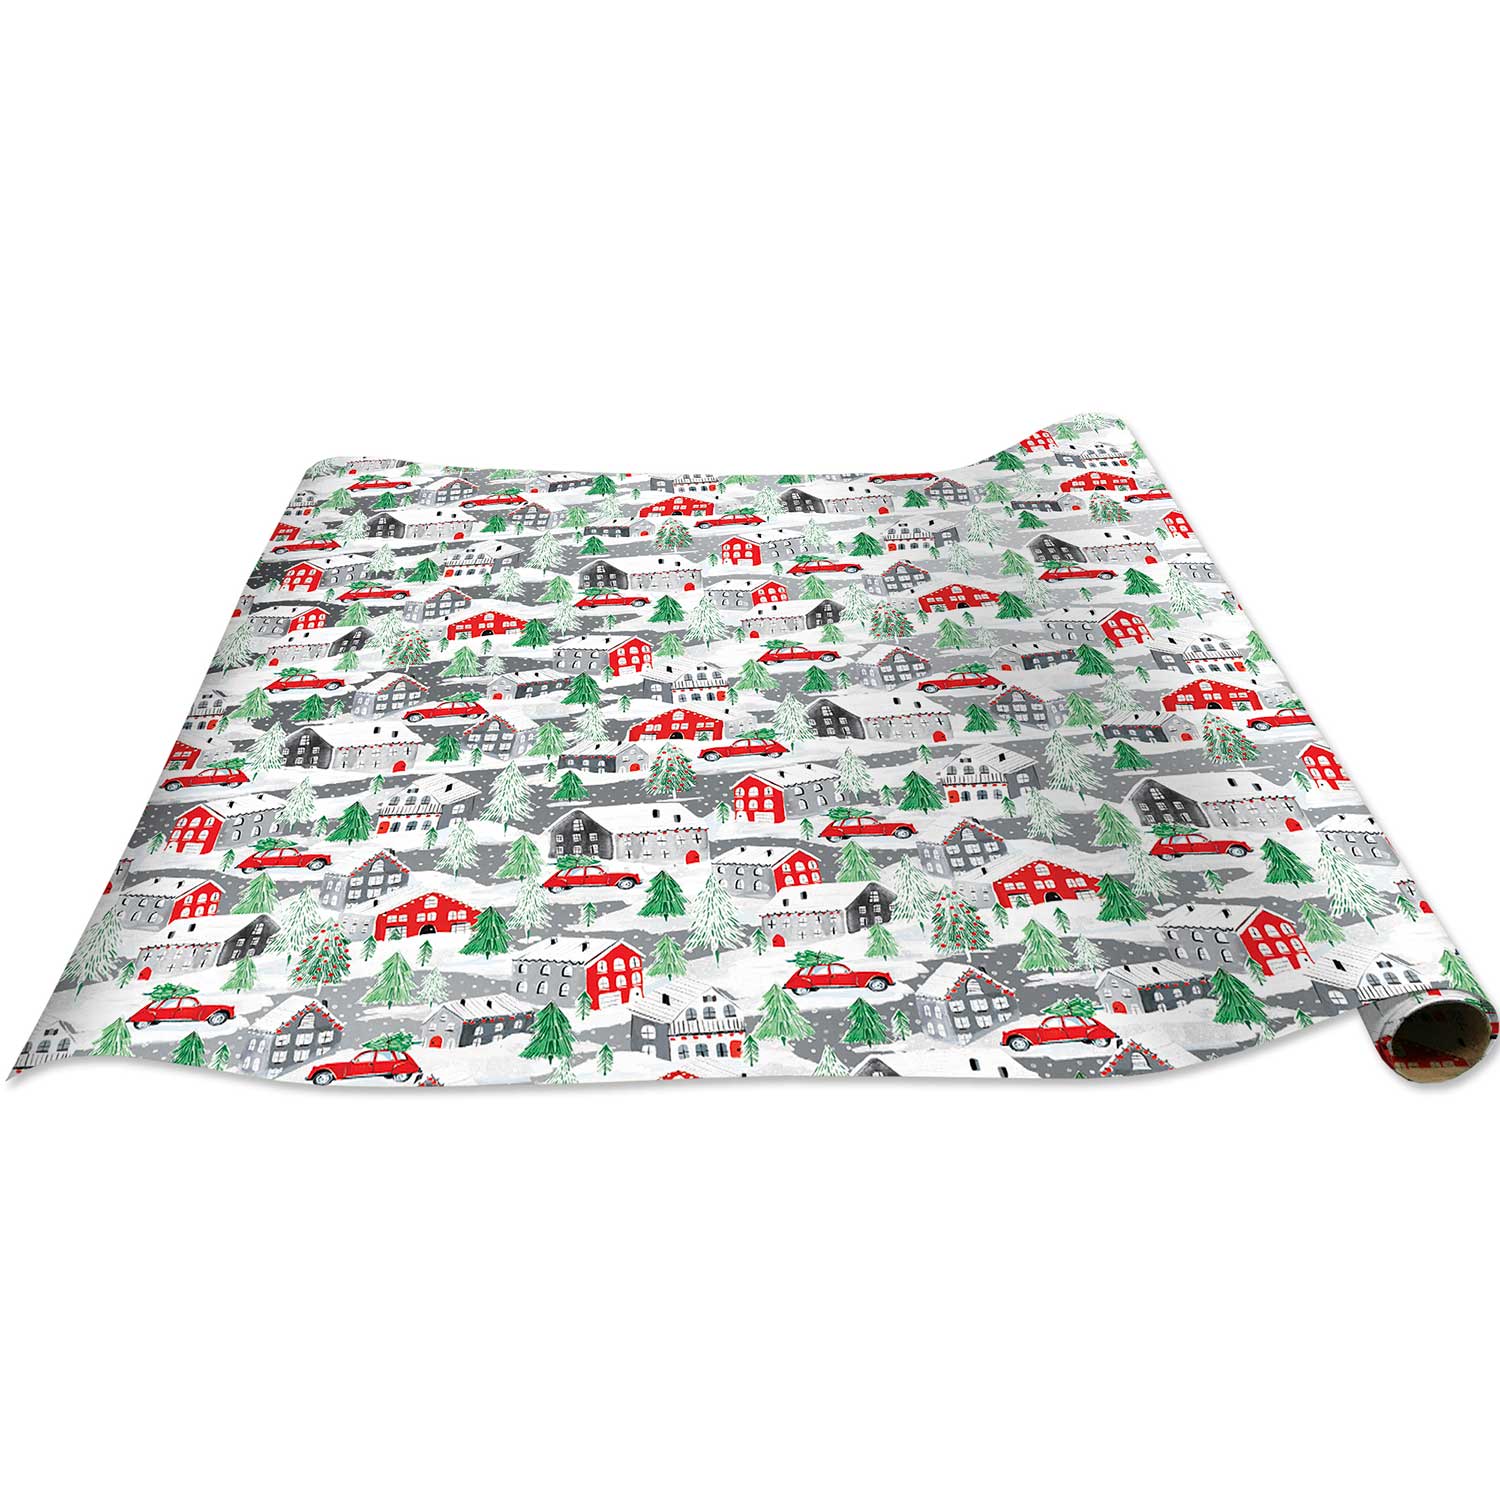 Cassette Tape Wrapping Paper  80's Christmas Wrapping Paper